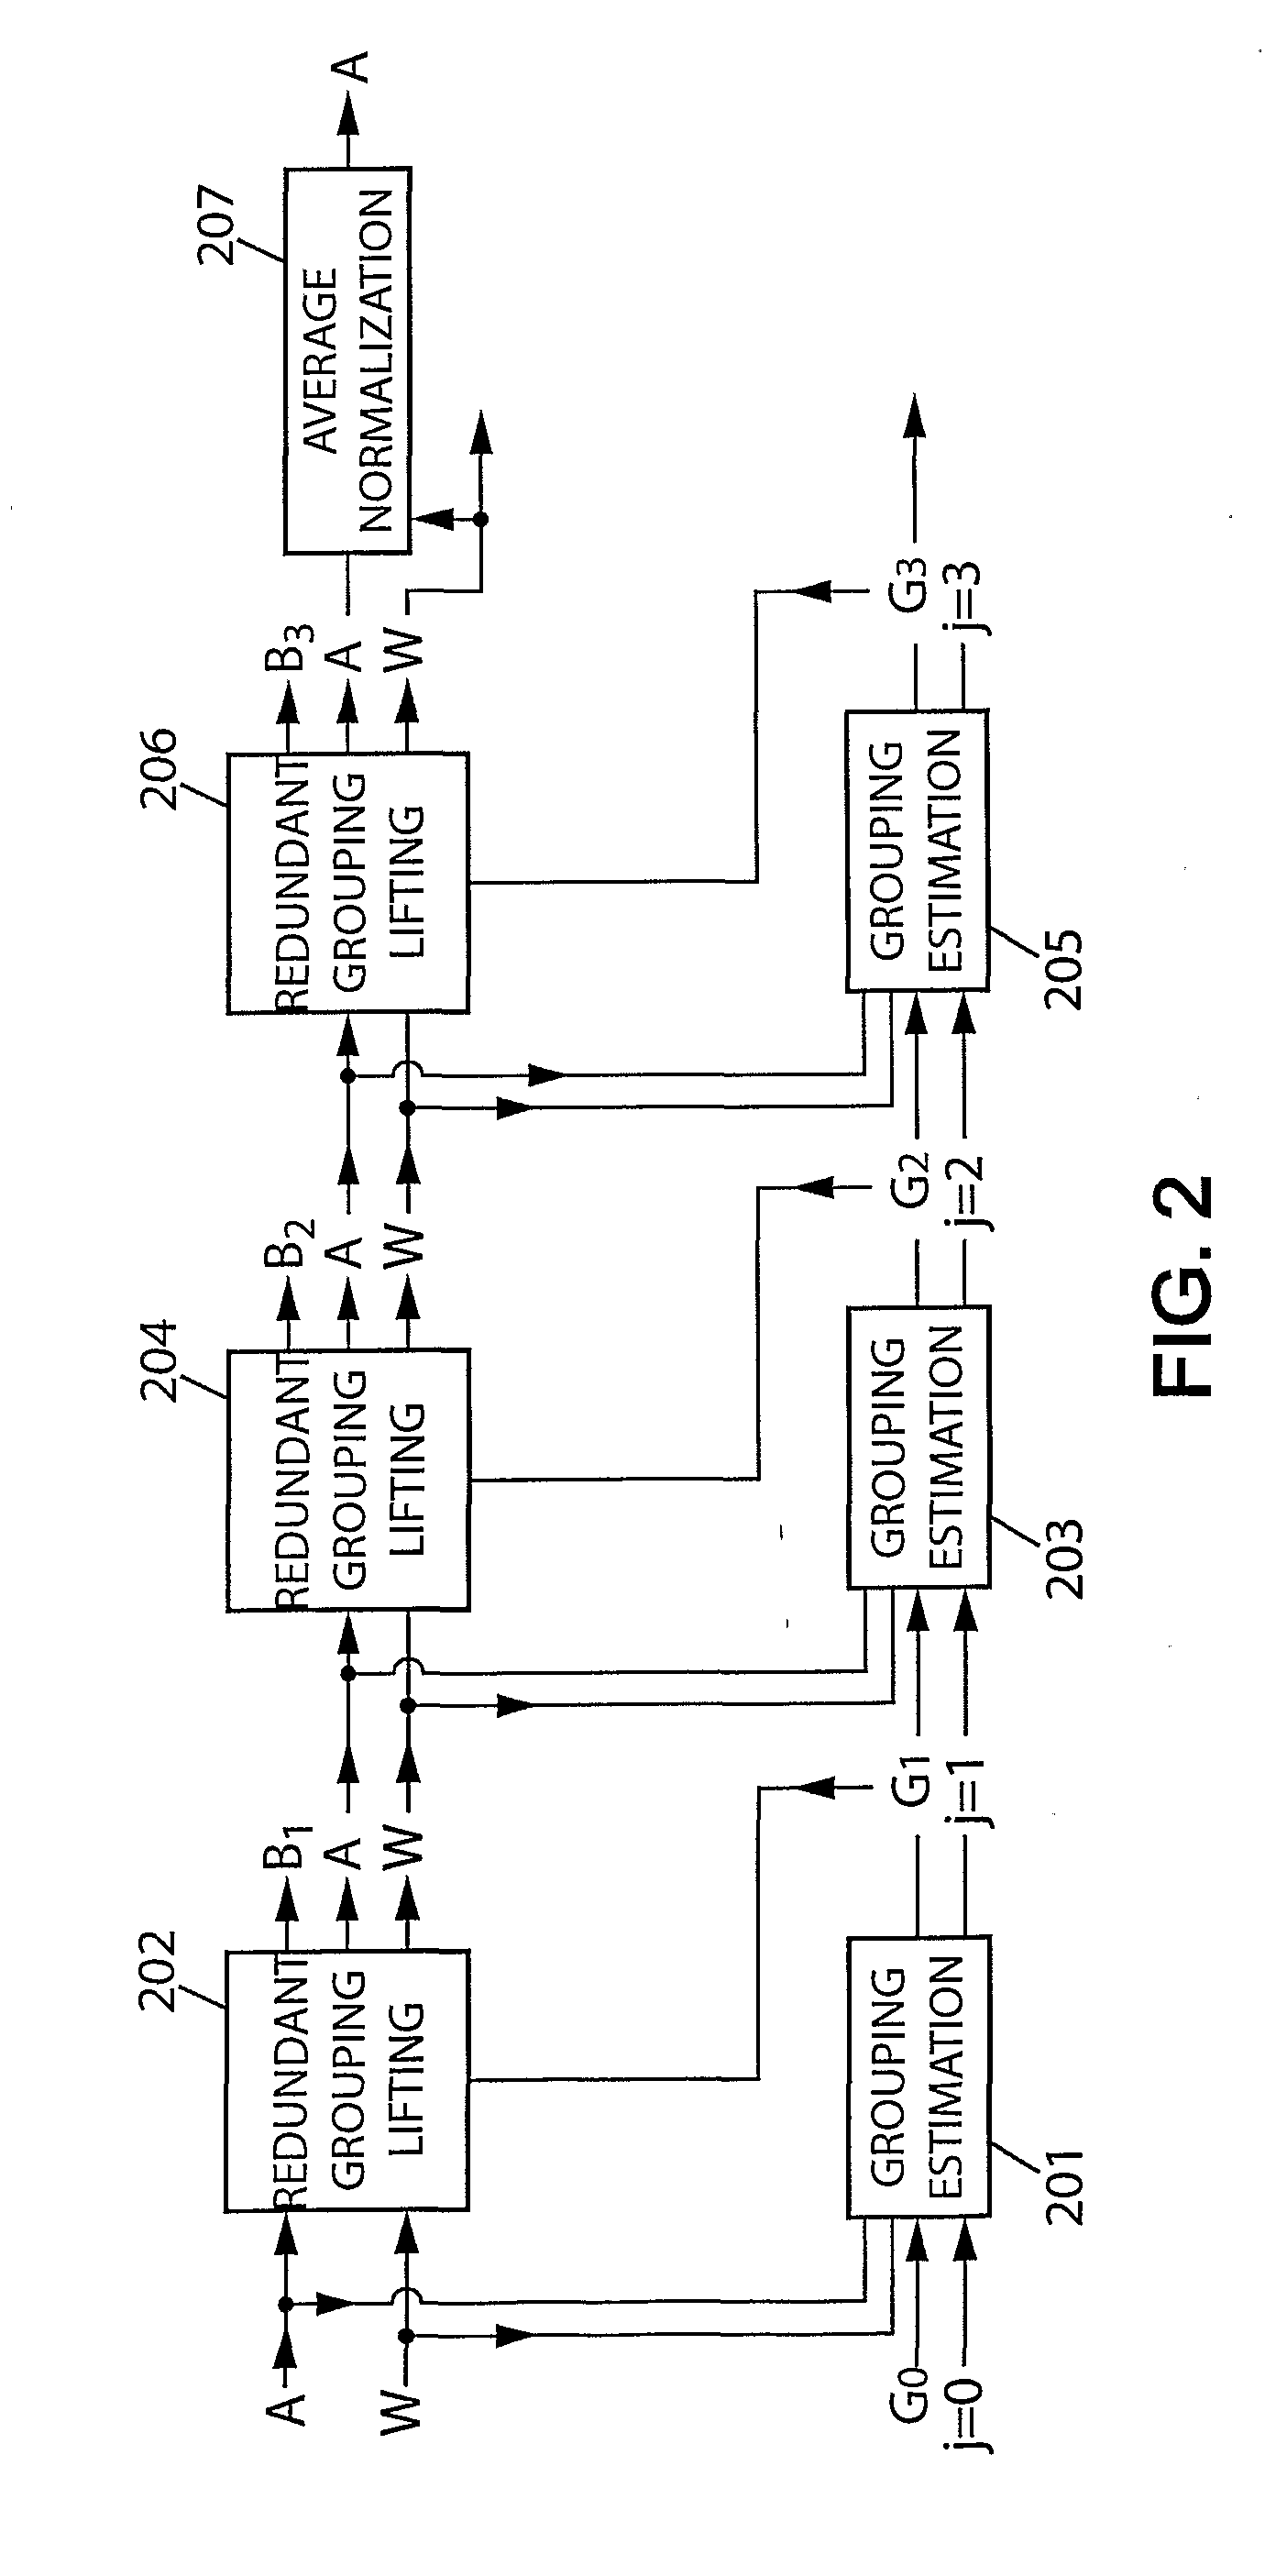 Method and apparatus for enhancing signals with multiscale grouping bandelets